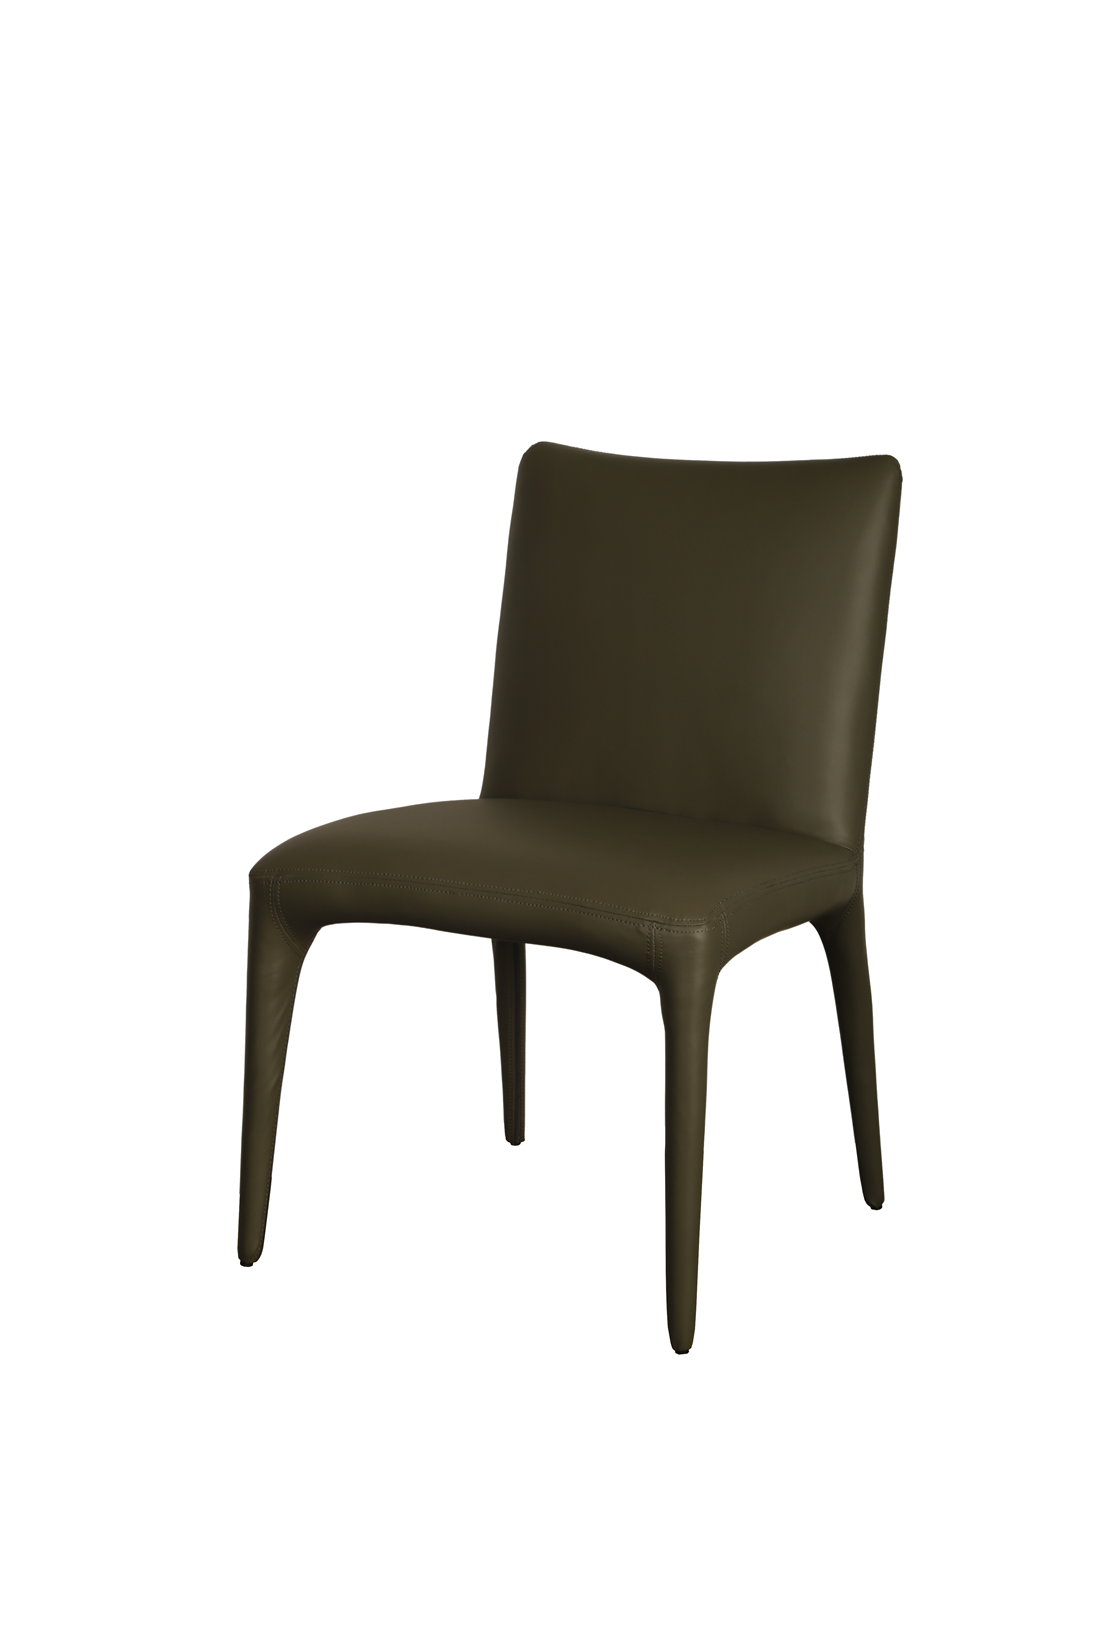 Trevon Dining Chair - Olive (Set of 2)